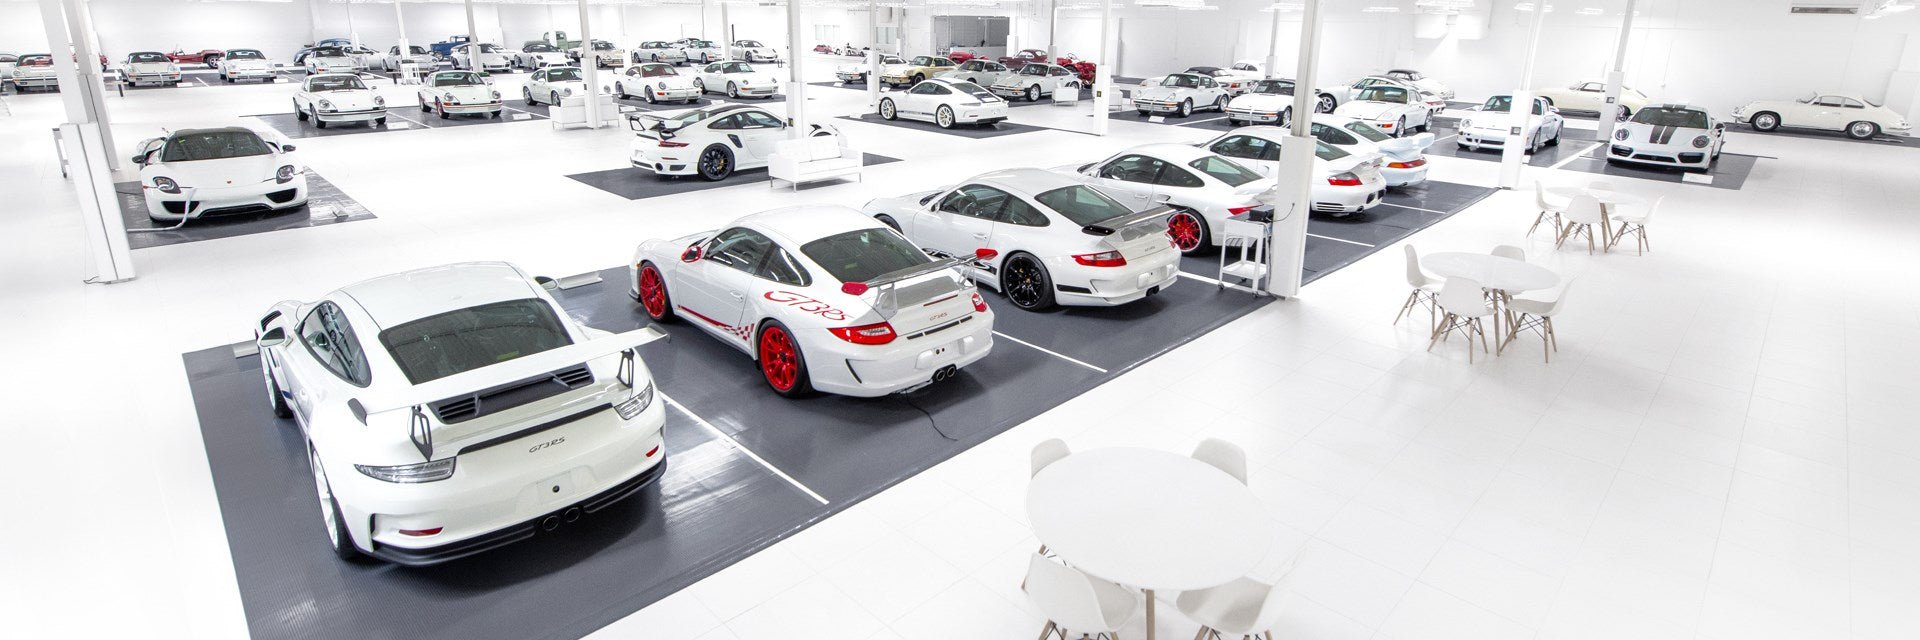 Rare Collection Of 56 White Porsches Is Heading To Auction - DSF Antique Jewelry